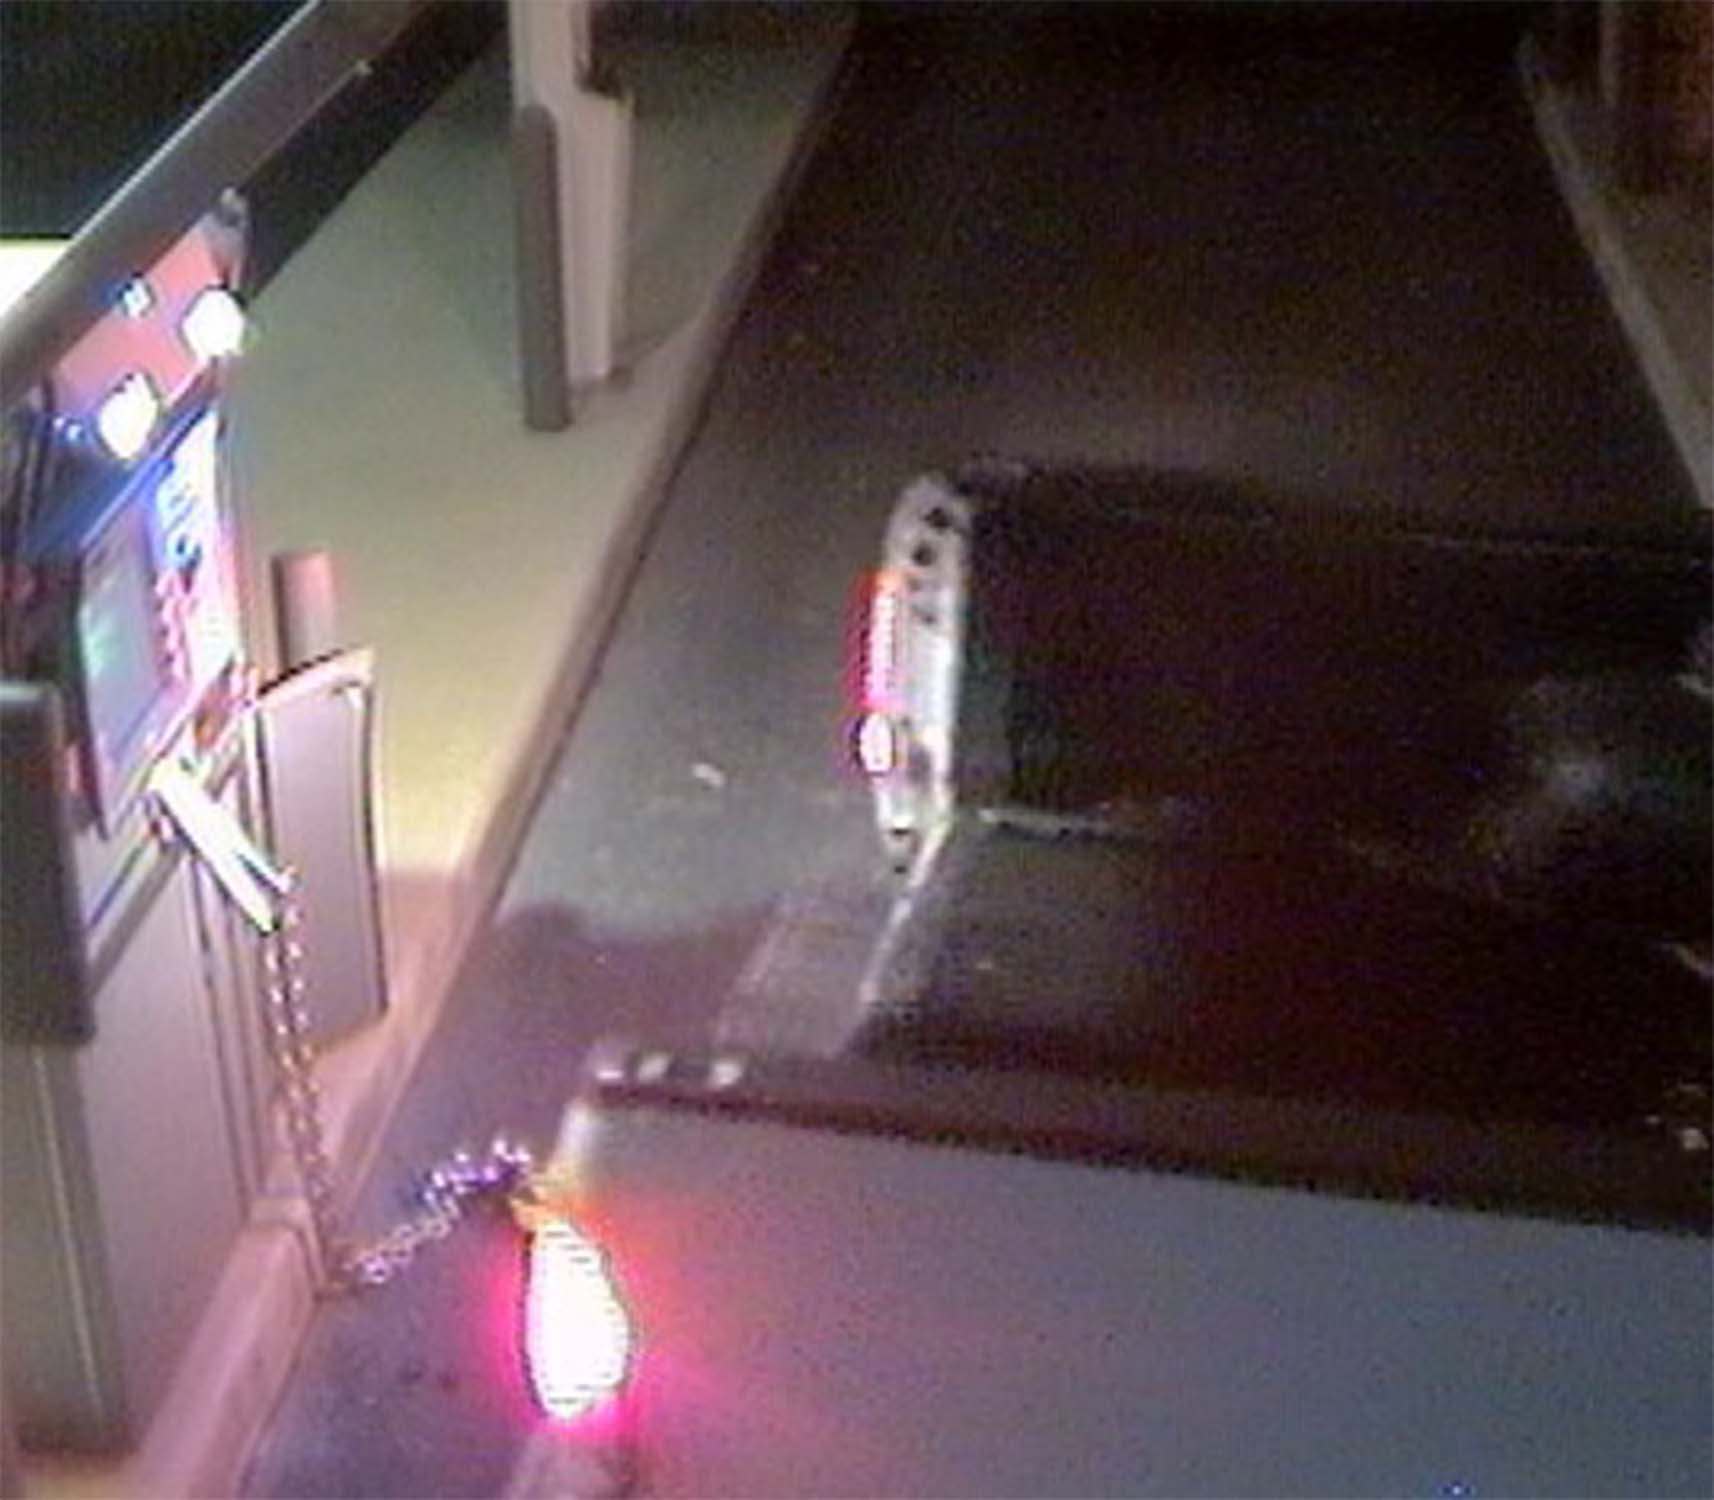 Trussville Police investigate an attempt to steal ATM